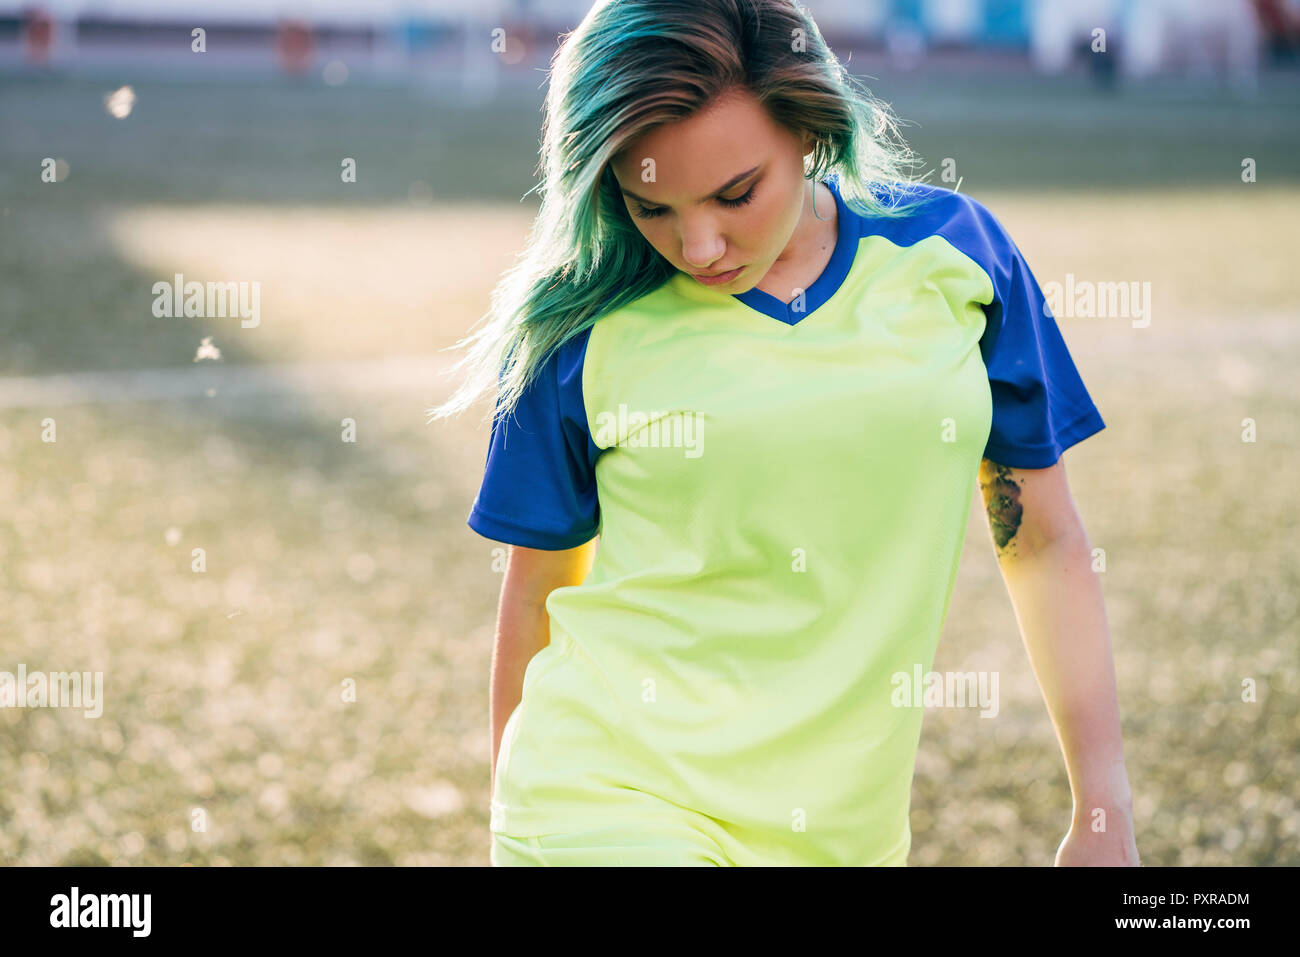 Portrait of young woman in jersey on football ground looking down Stock Photo